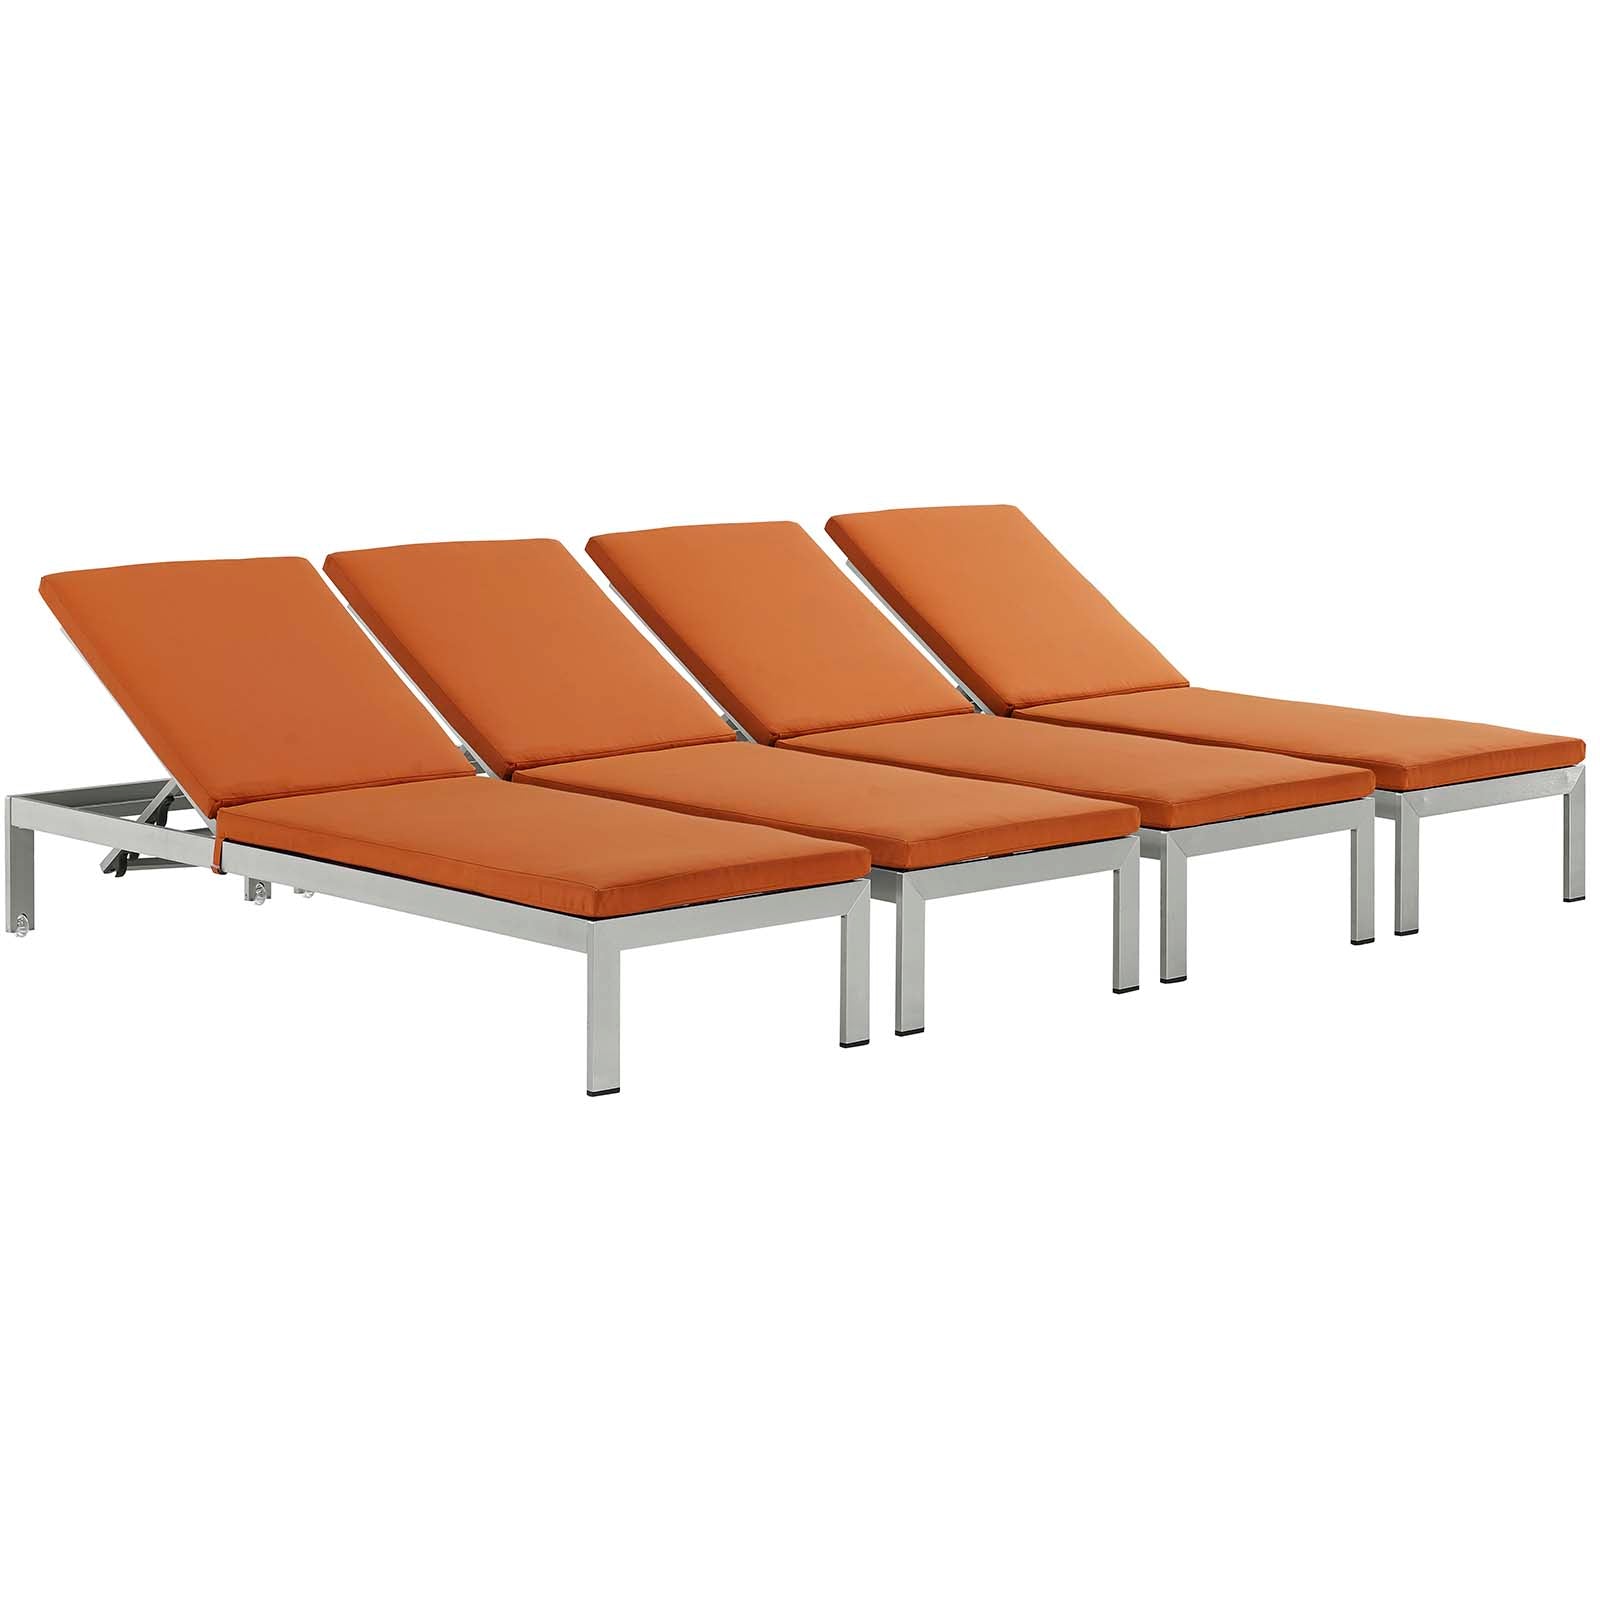 Modway Outdoor Loungers - Shore Chaise with Cushions Outdoor Patio Aluminum Silver Orange (Set of 4)